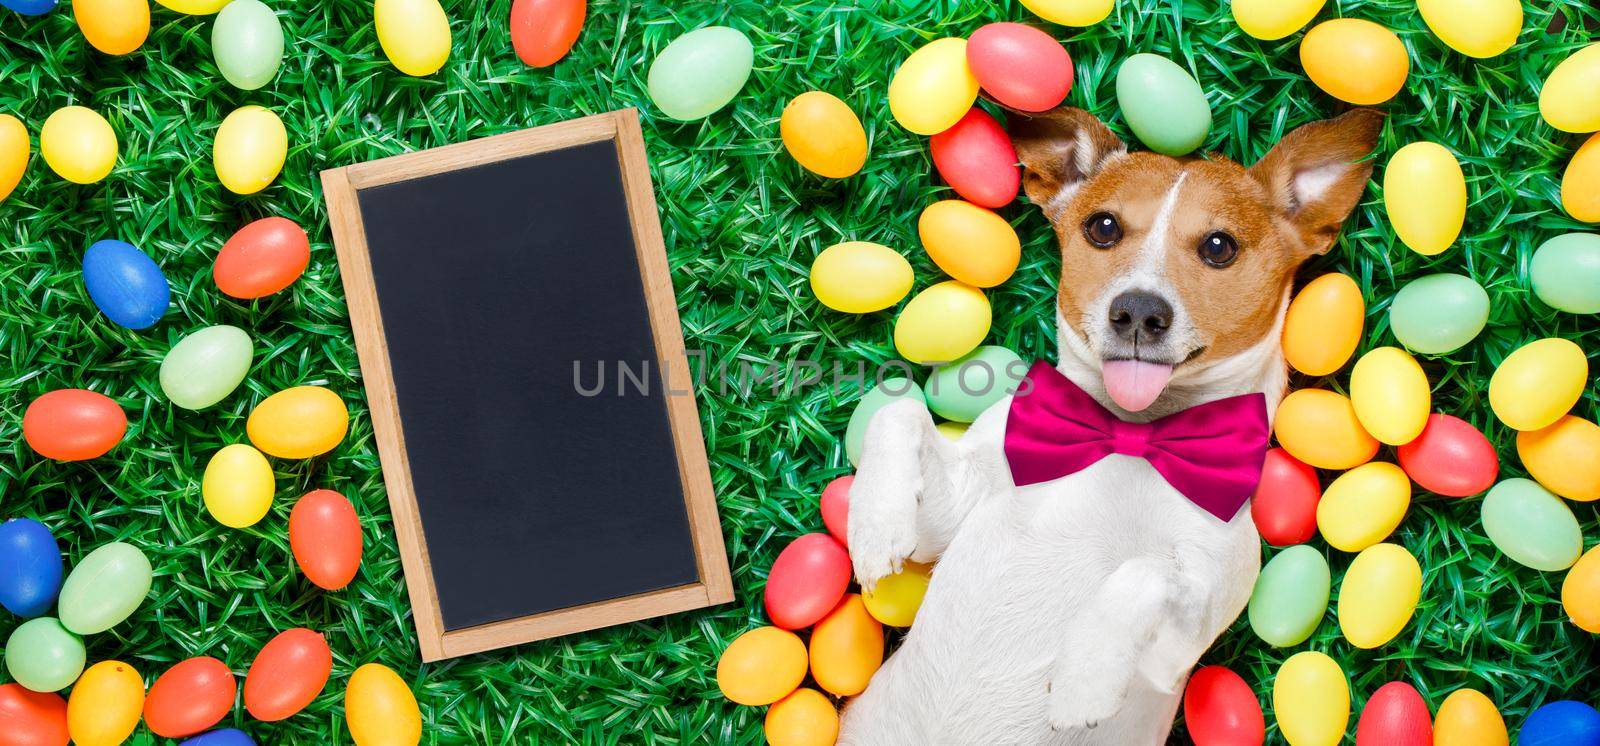 funny jack russell easter bunny  dog with eggs around on grass sticking out tongue with  empty  blackboard , banner or placard